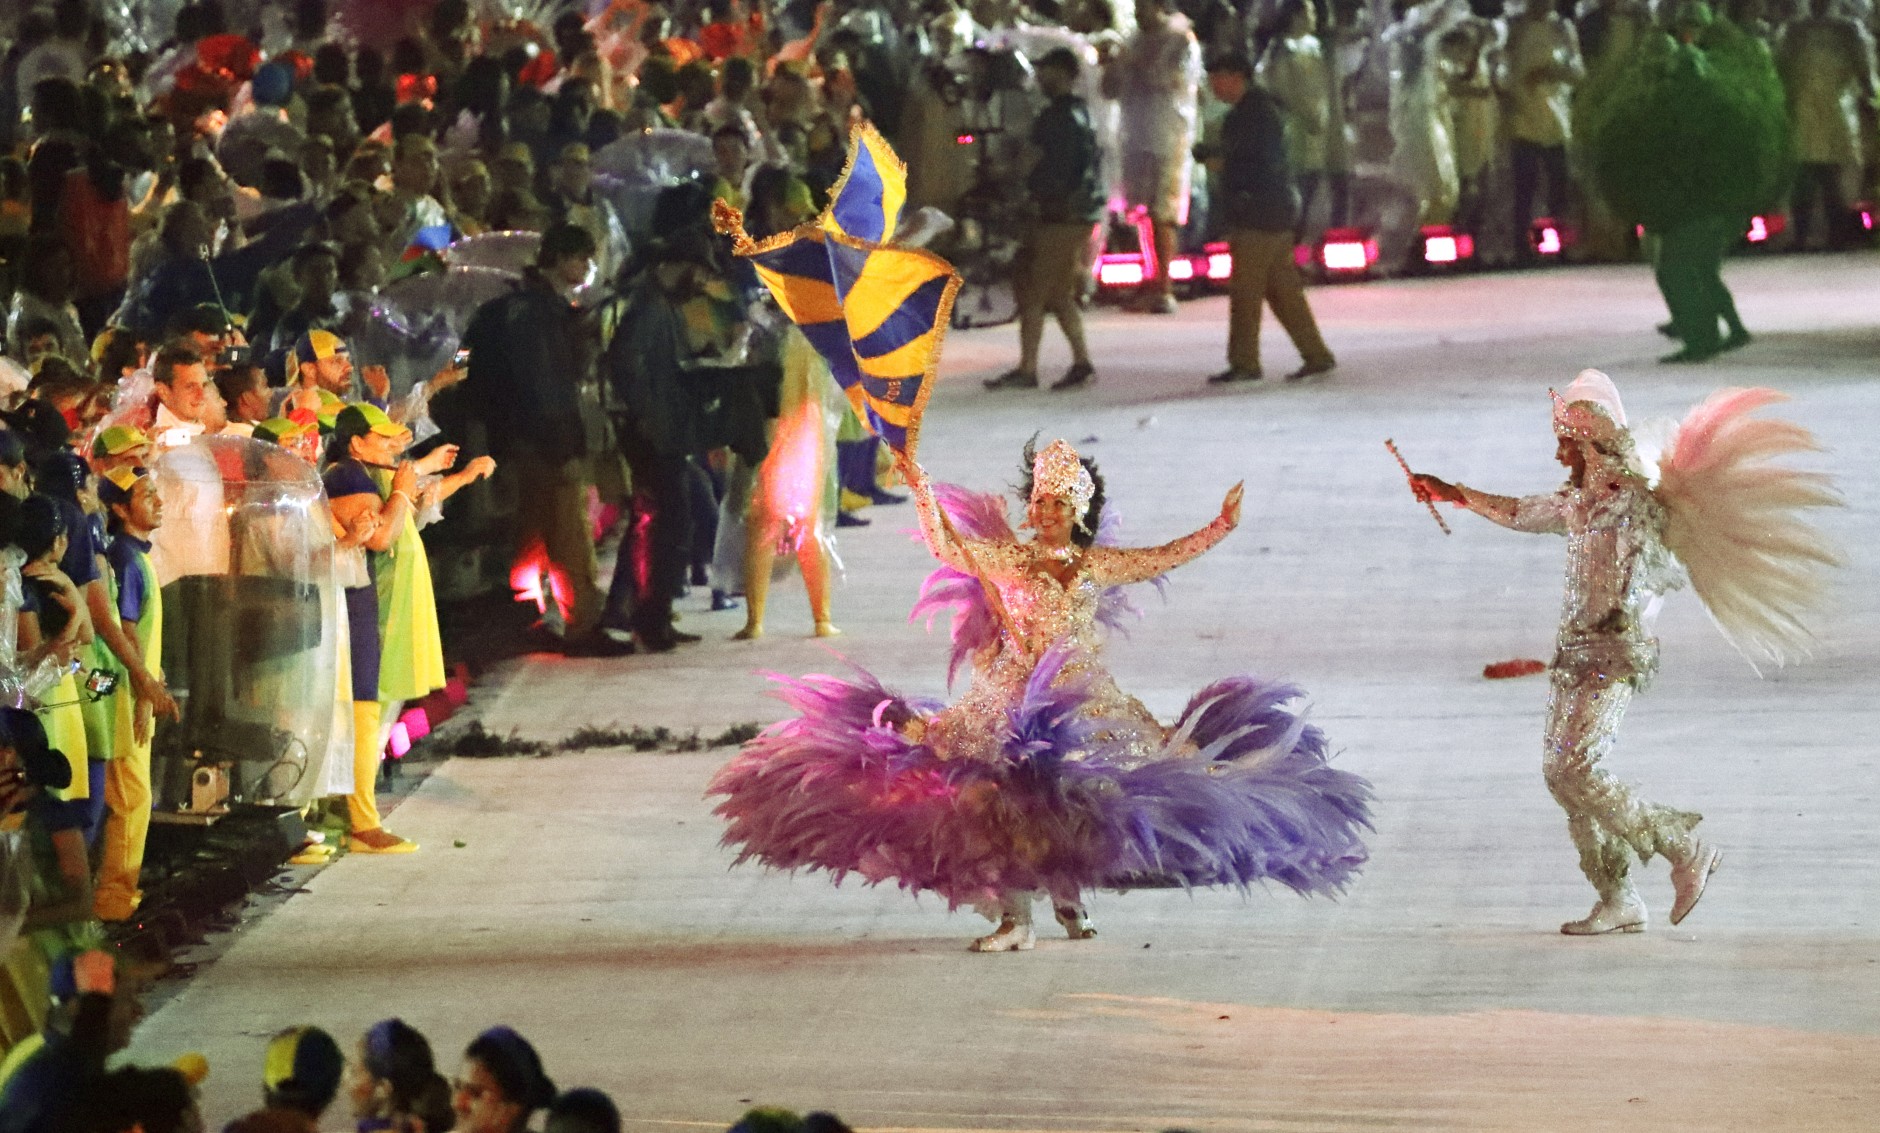 Performers dance during the closing ceremony in the Maracana stadium at the 2016 Summer Olympics in Rio de Janeiro, Brazil, Sunday, Aug. 21, 2016. (AP Photo/Mark Humphrey)